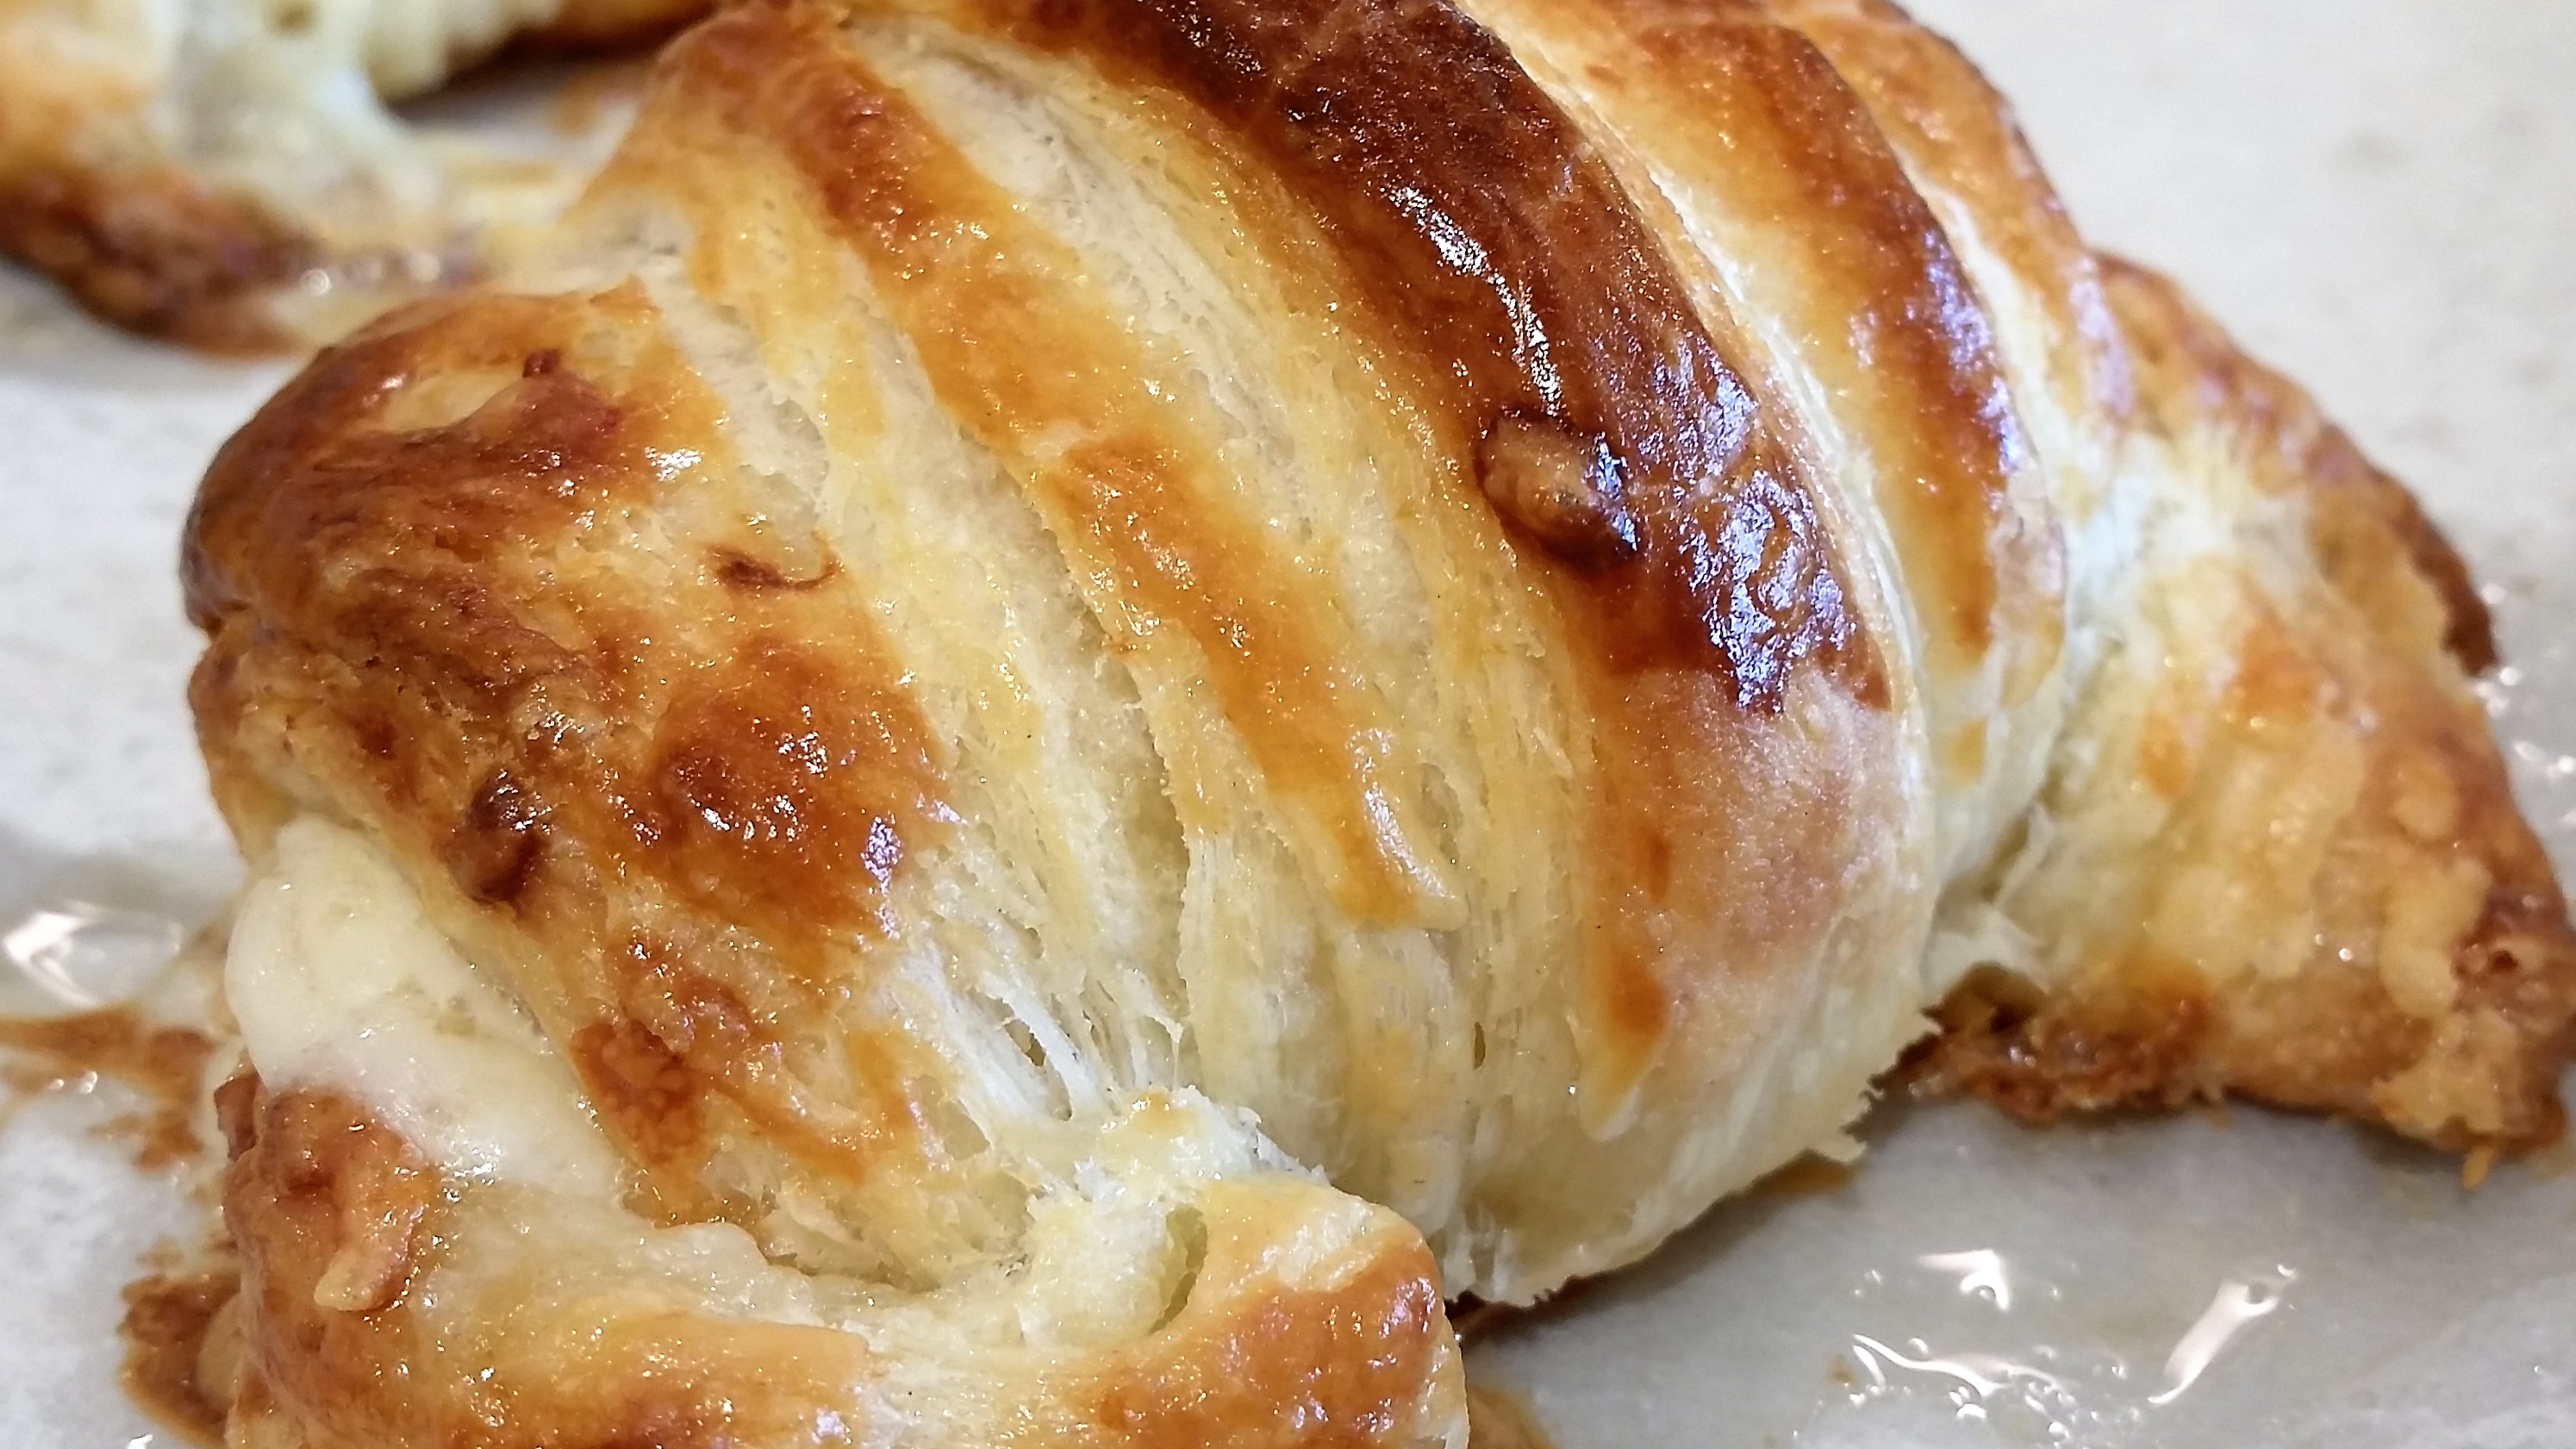 ham-and-cheese-croissant-out-of-the-oven